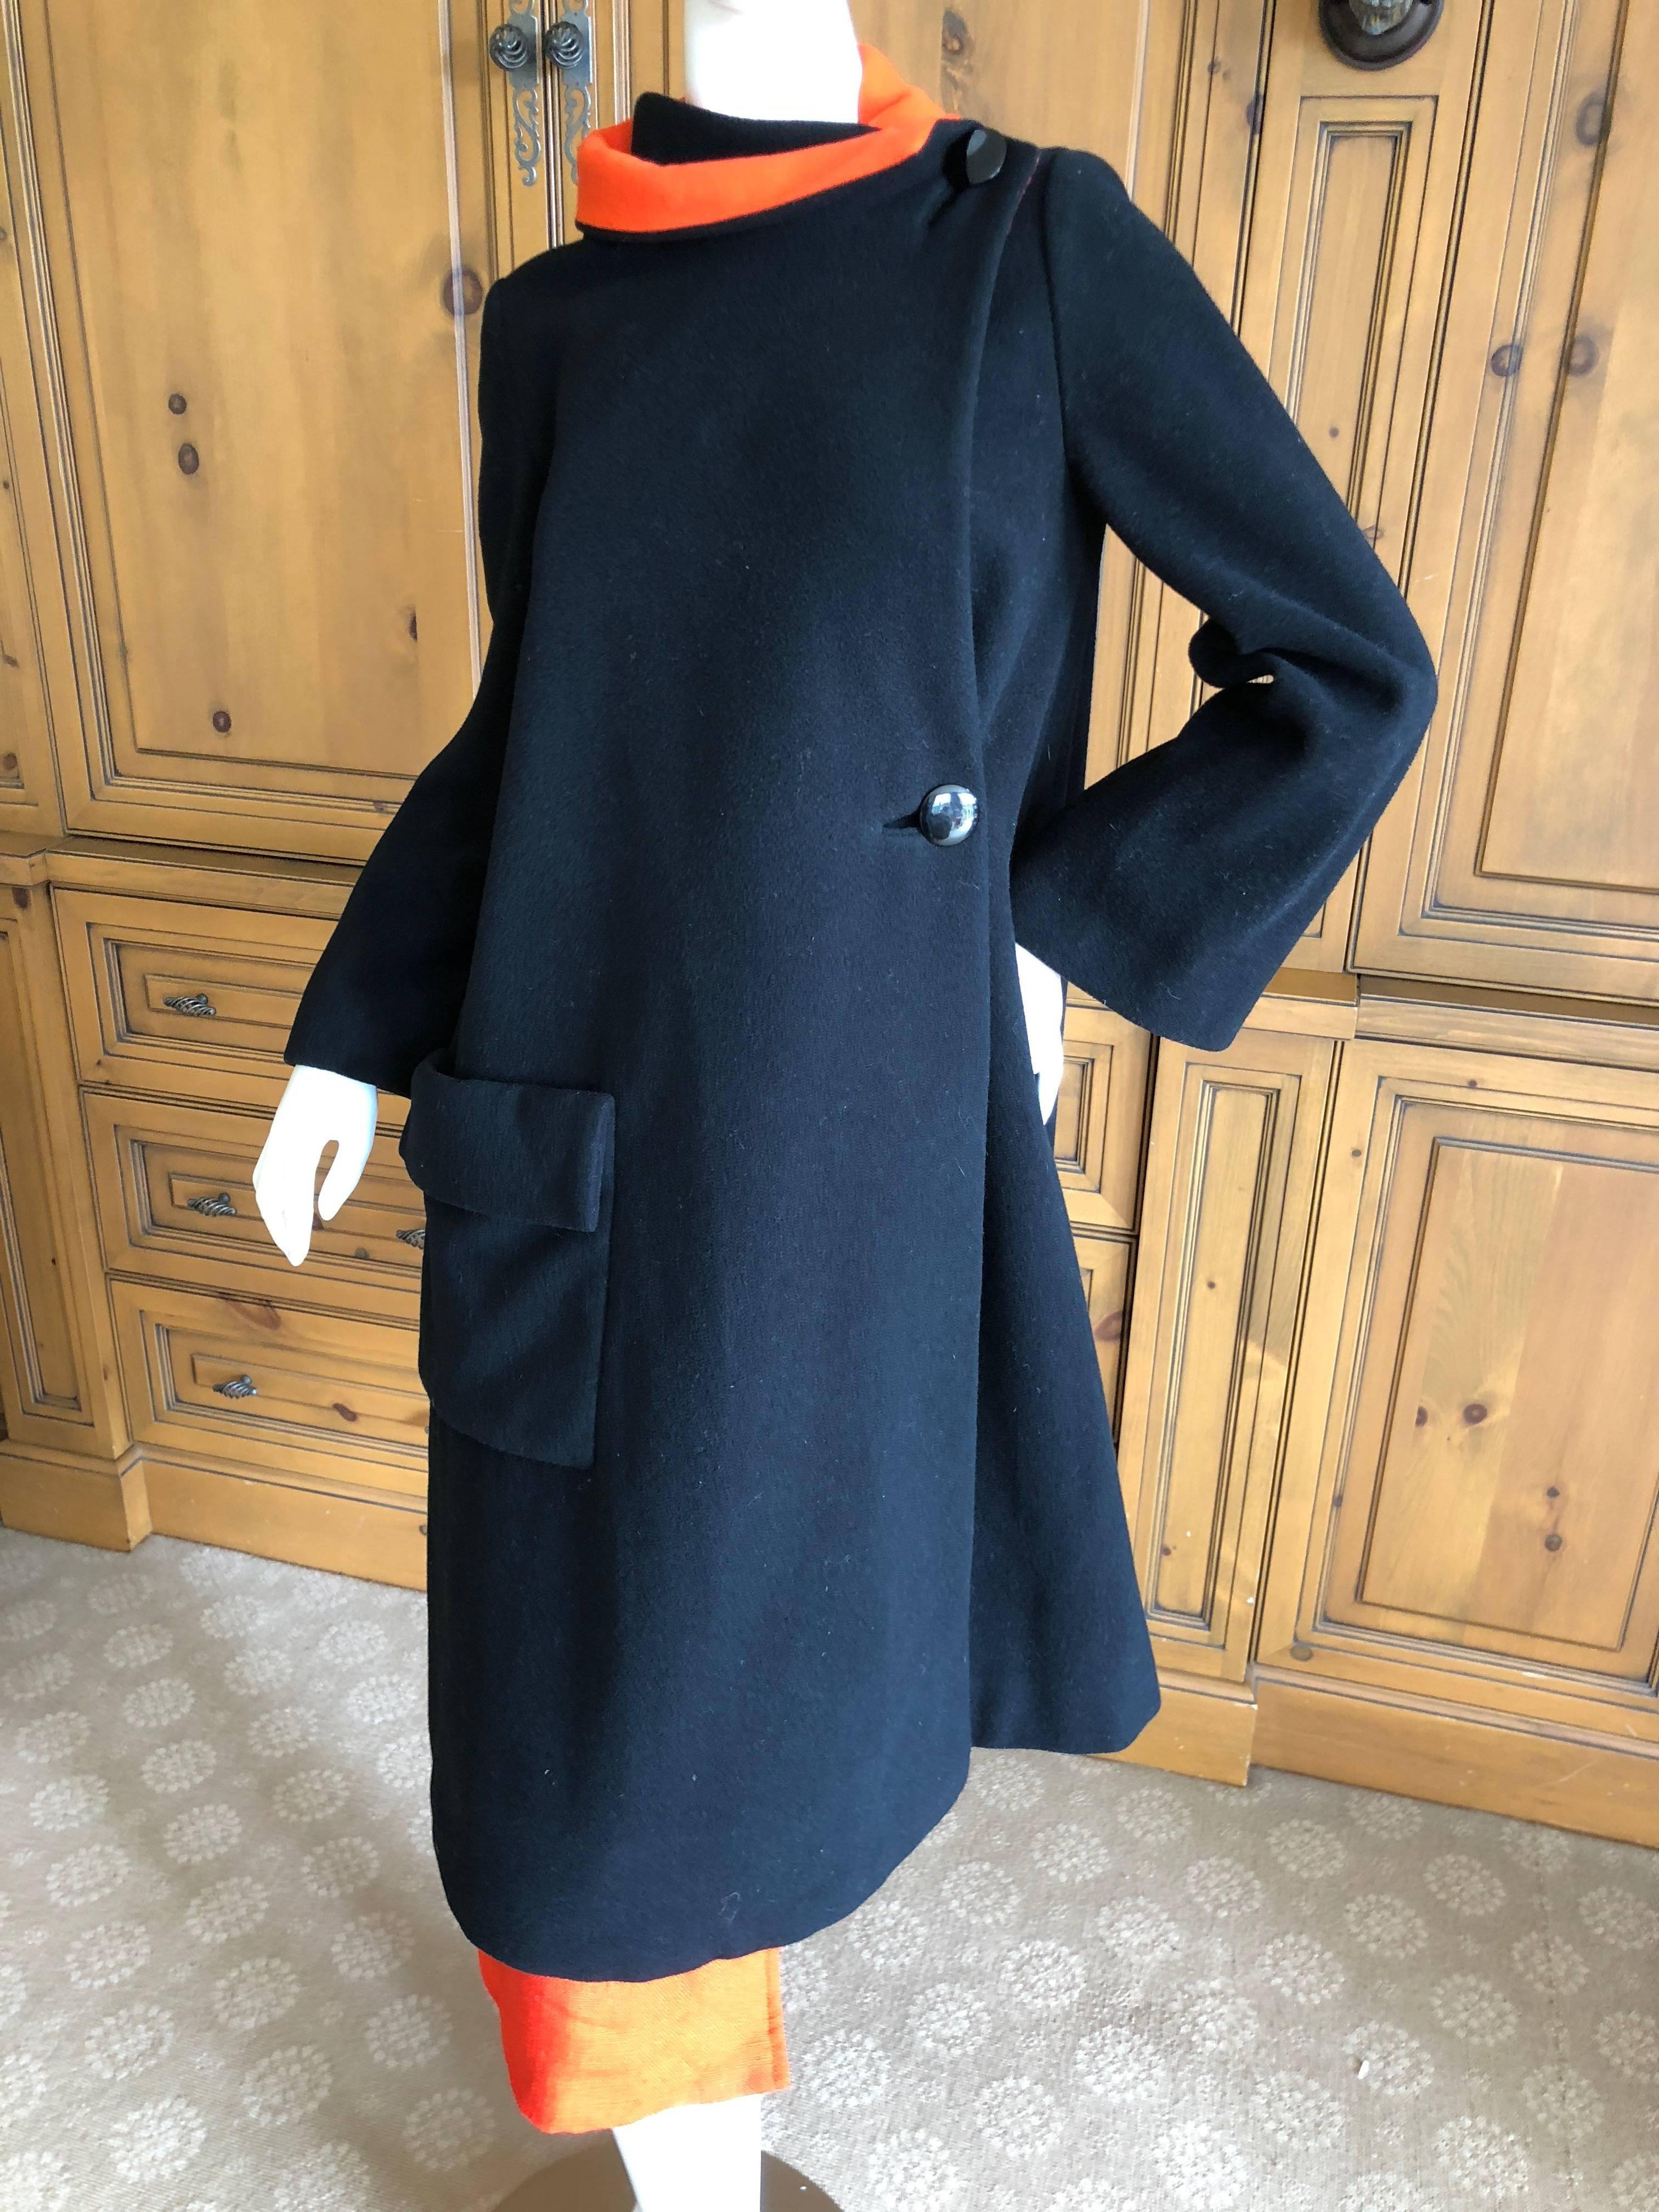 Cardinali 1970 Black Wool Coat with Orange Lining and Matching Skirt For Sale 4